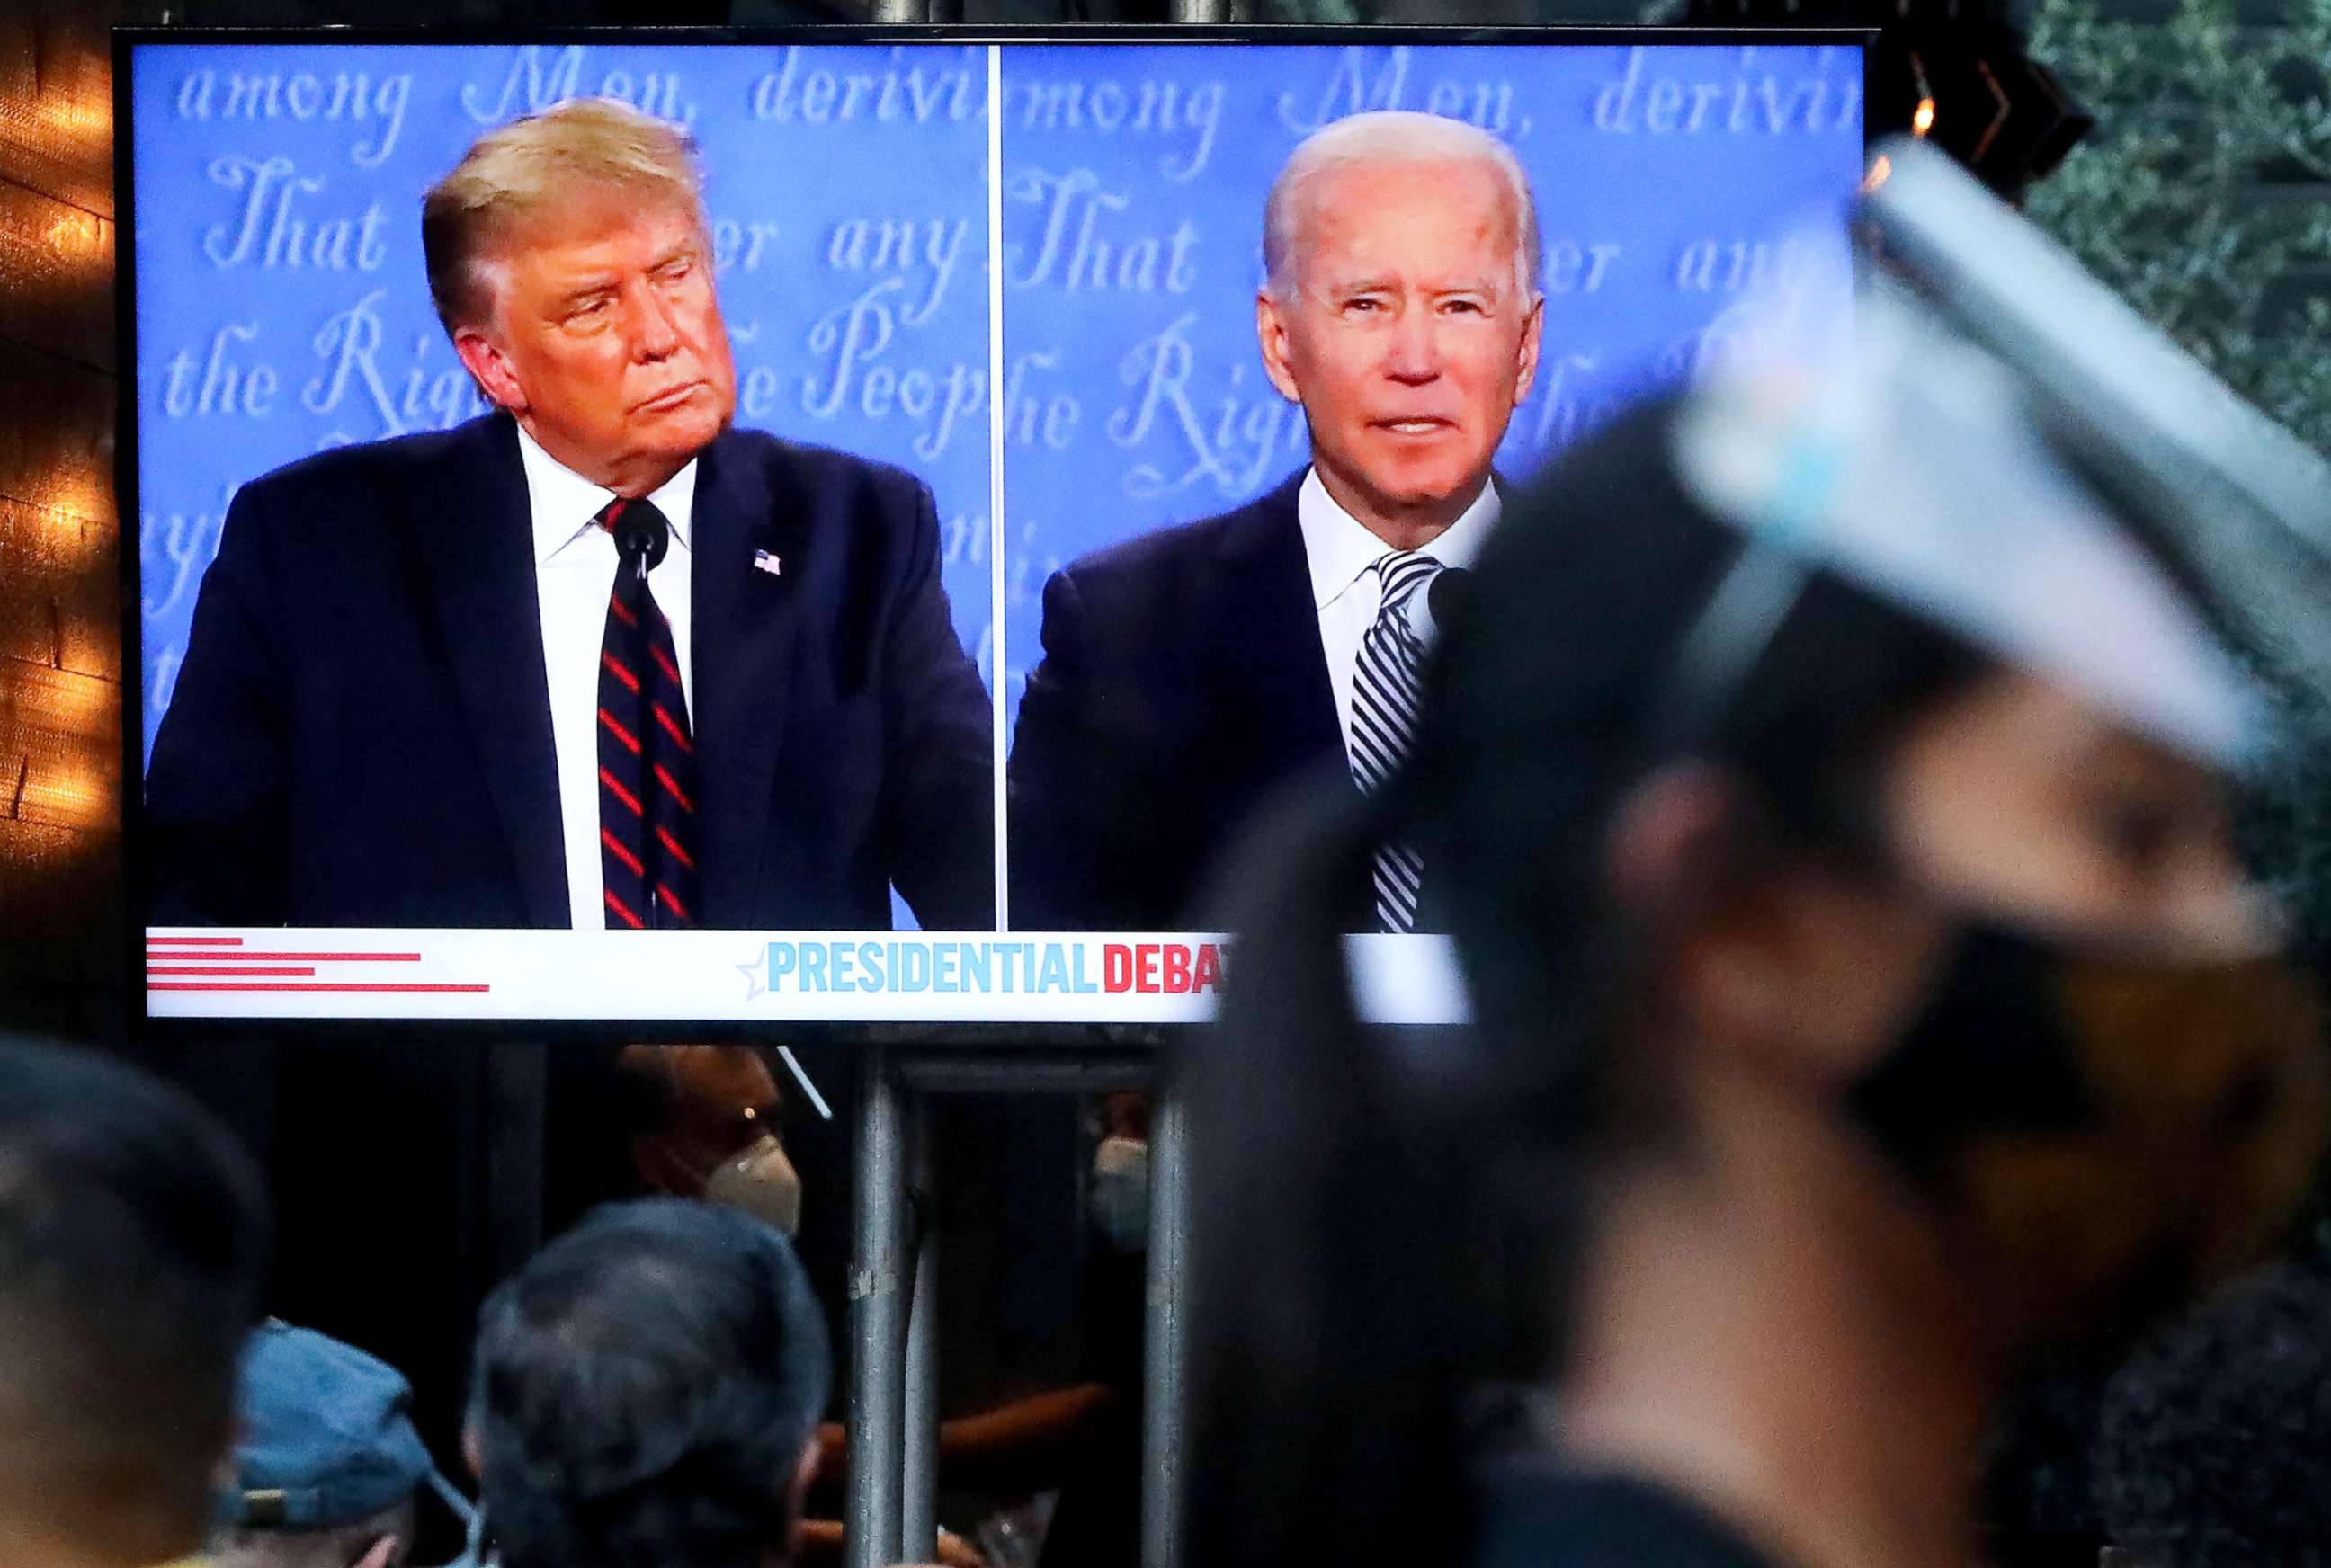 PHOTO: The first debate between President Donald Trump and Democratic presidential nominee Joe Biden in Cleveland is watched by patrons at The Abbey in West Hollywood, Calif., Sept. 29, 2020.